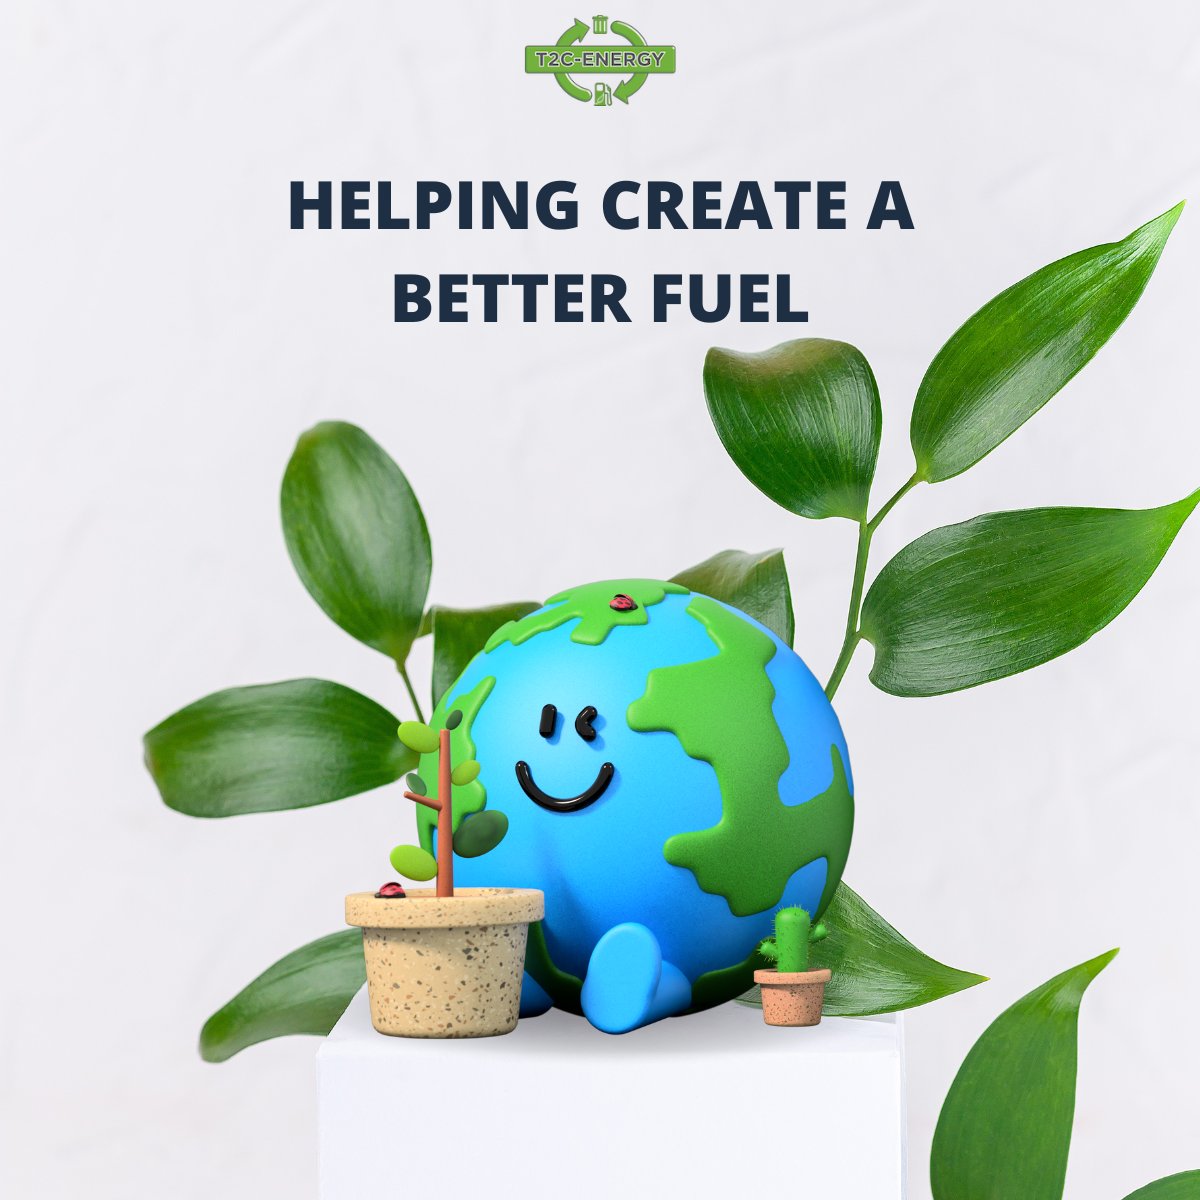 It's our duty and mission to create a fuel that has less impact on the environment.

The result? A better world for all!

#YesWeCan #WastetoFuel #BeEnergy